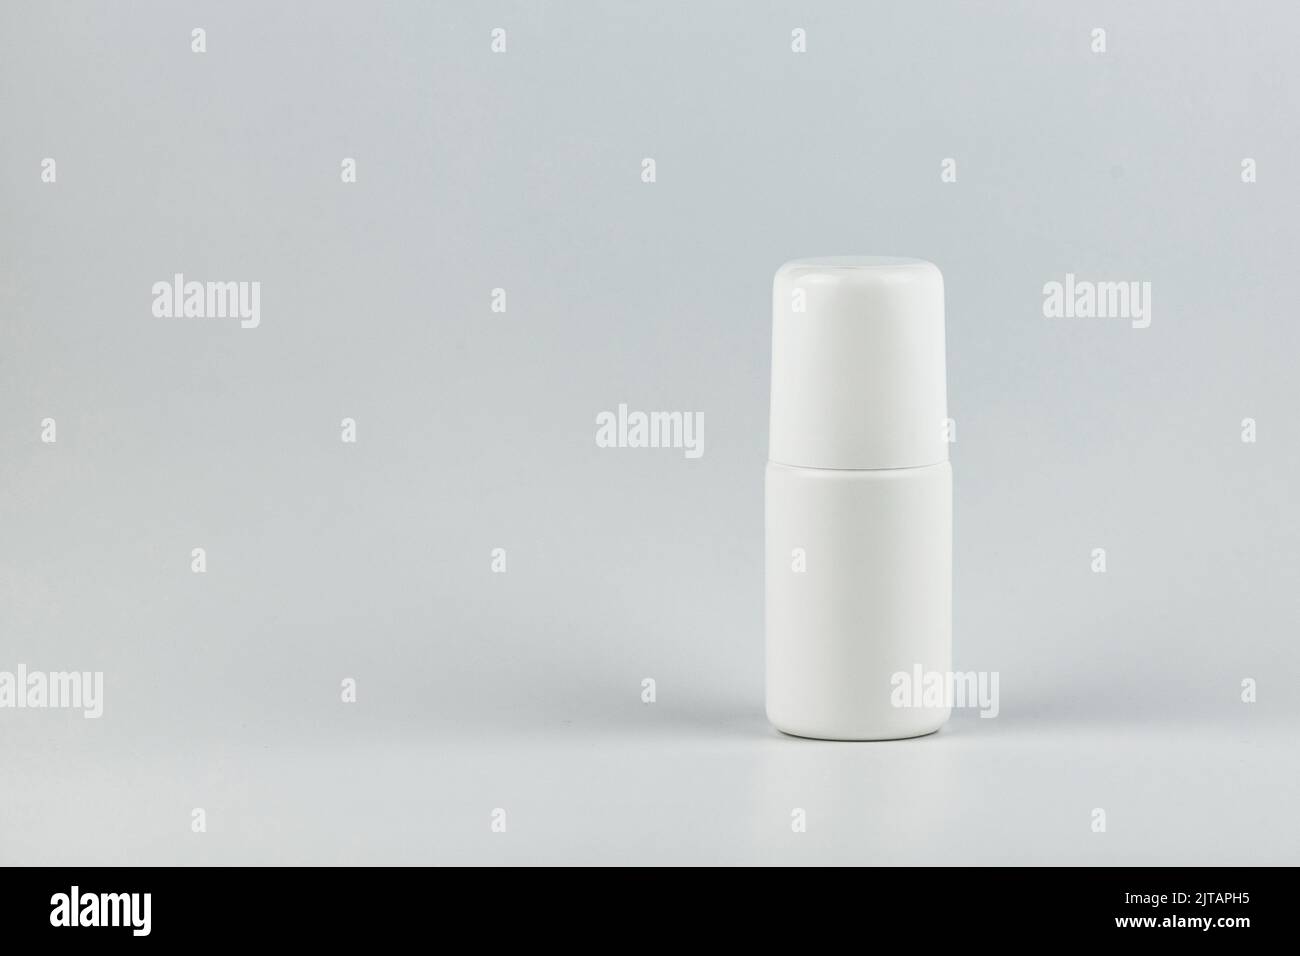 Unbranded white plastic flacon for cosmetics products. Skincare and cosmetology branding identity template for text and design Stock Photo